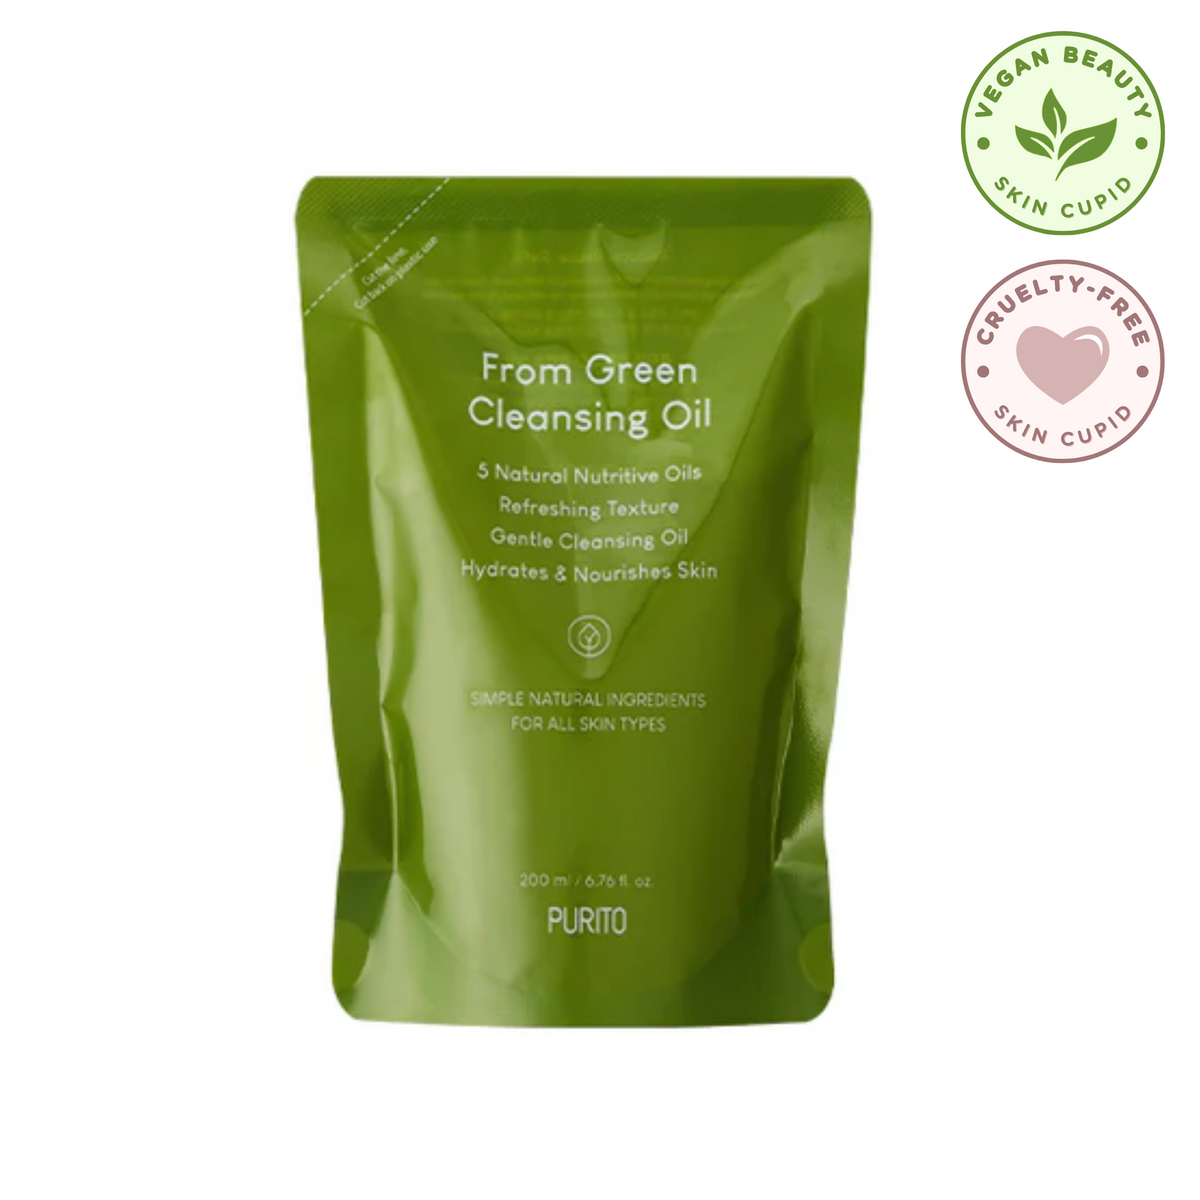 PURITO From Green Cleansing Oil Refill (200ml)